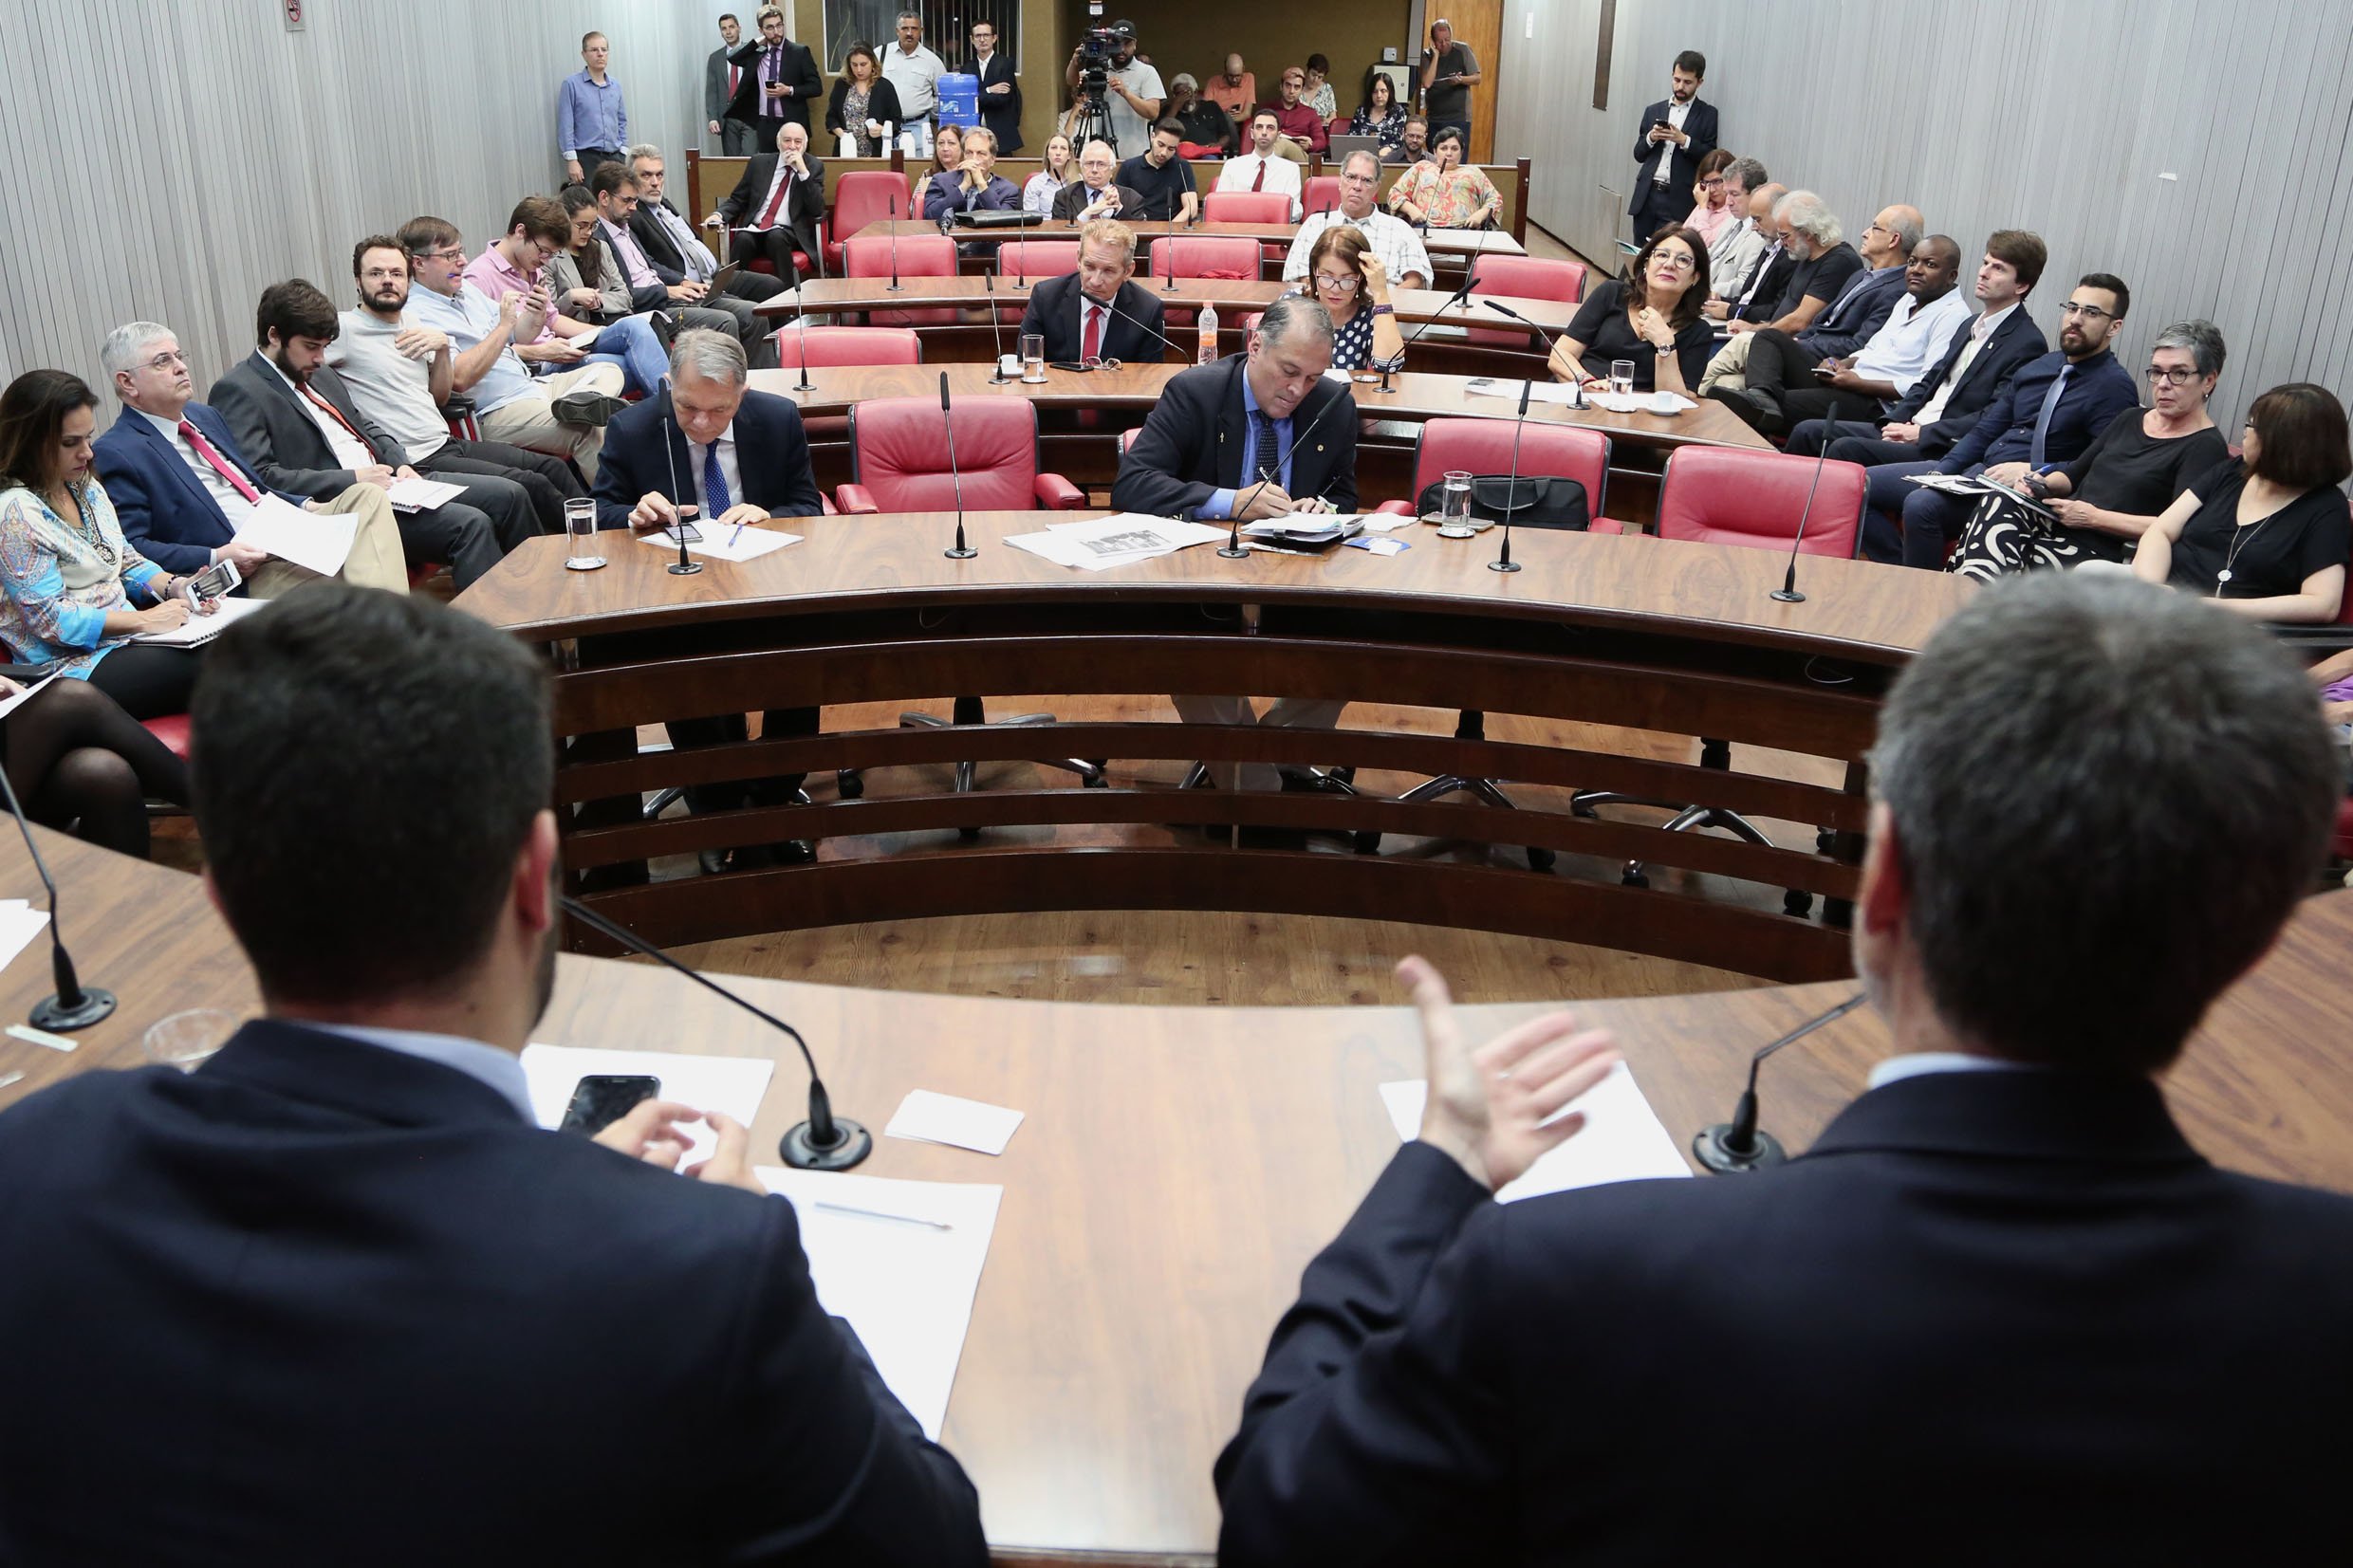 Parlamentares na comissão<a style='float:right' href='https://www3.al.sp.gov.br/repositorio/noticia/N-11-2019/fg244672.jpg' target=_blank><img src='/_img/material-file-download-white.png' width='14px' alt='Clique para baixar a imagem'></a>